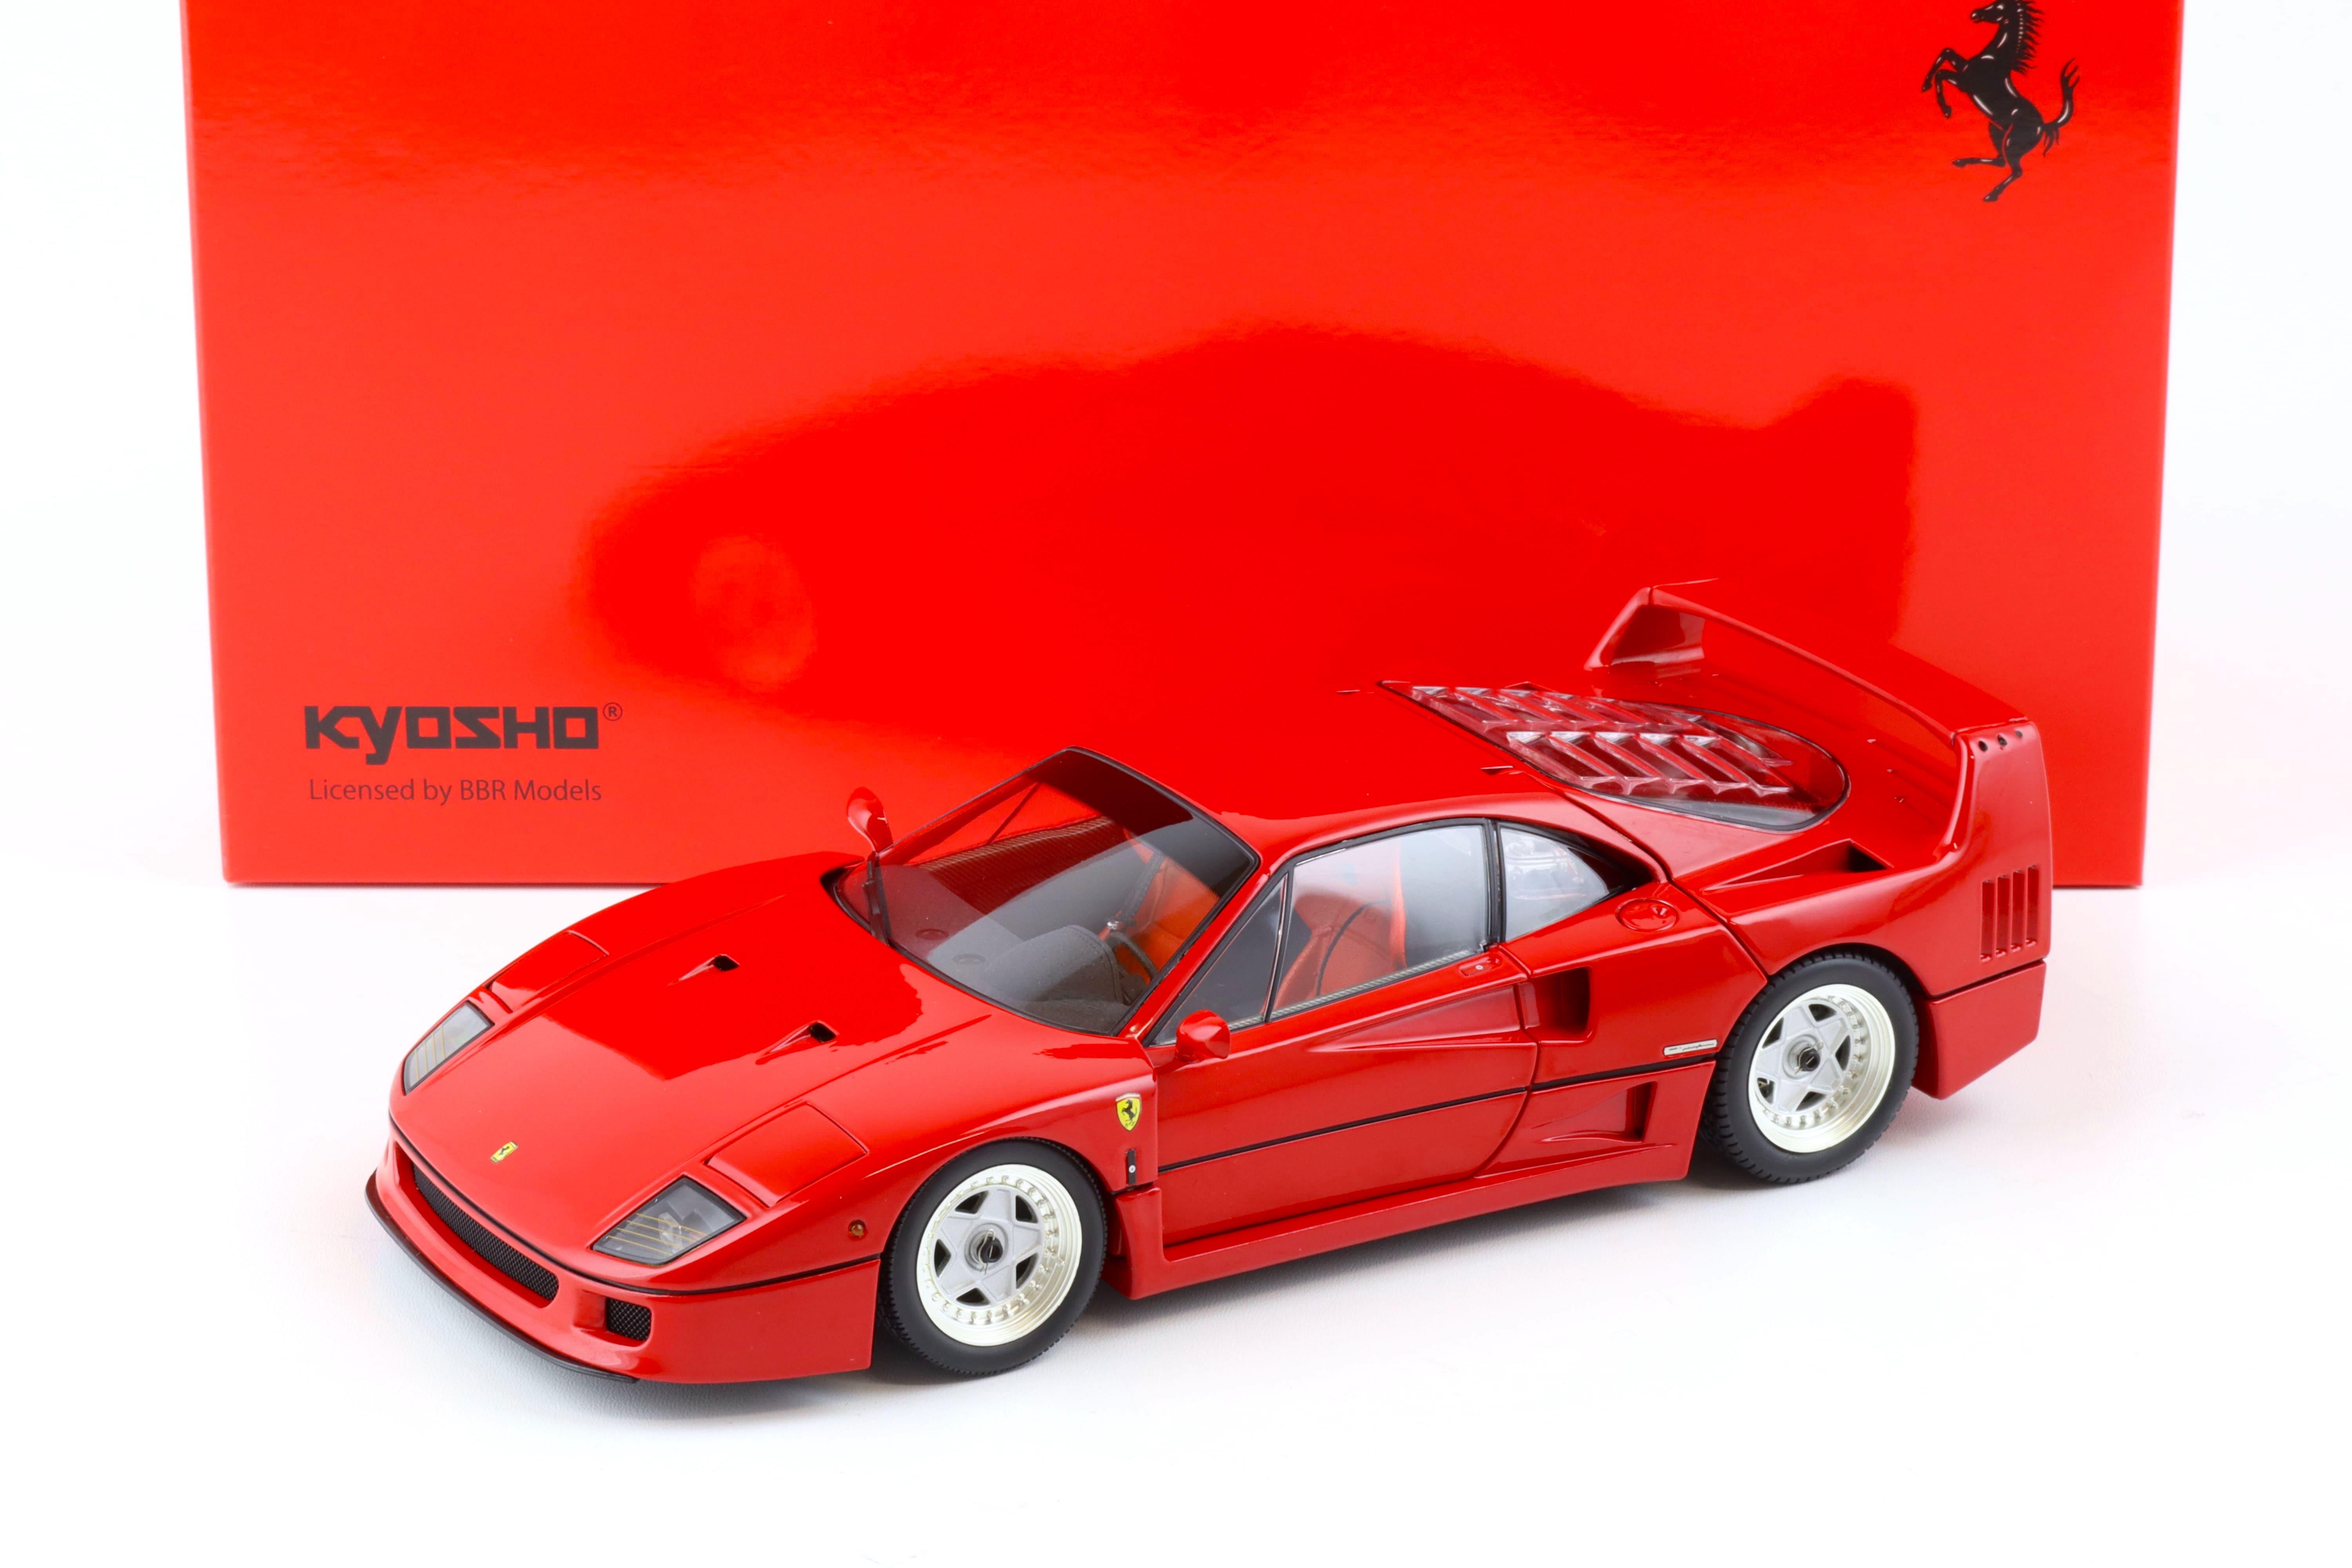 1:18 Kyosho 1987 Ferrari F40 Coupe red 08416R Die-Cast